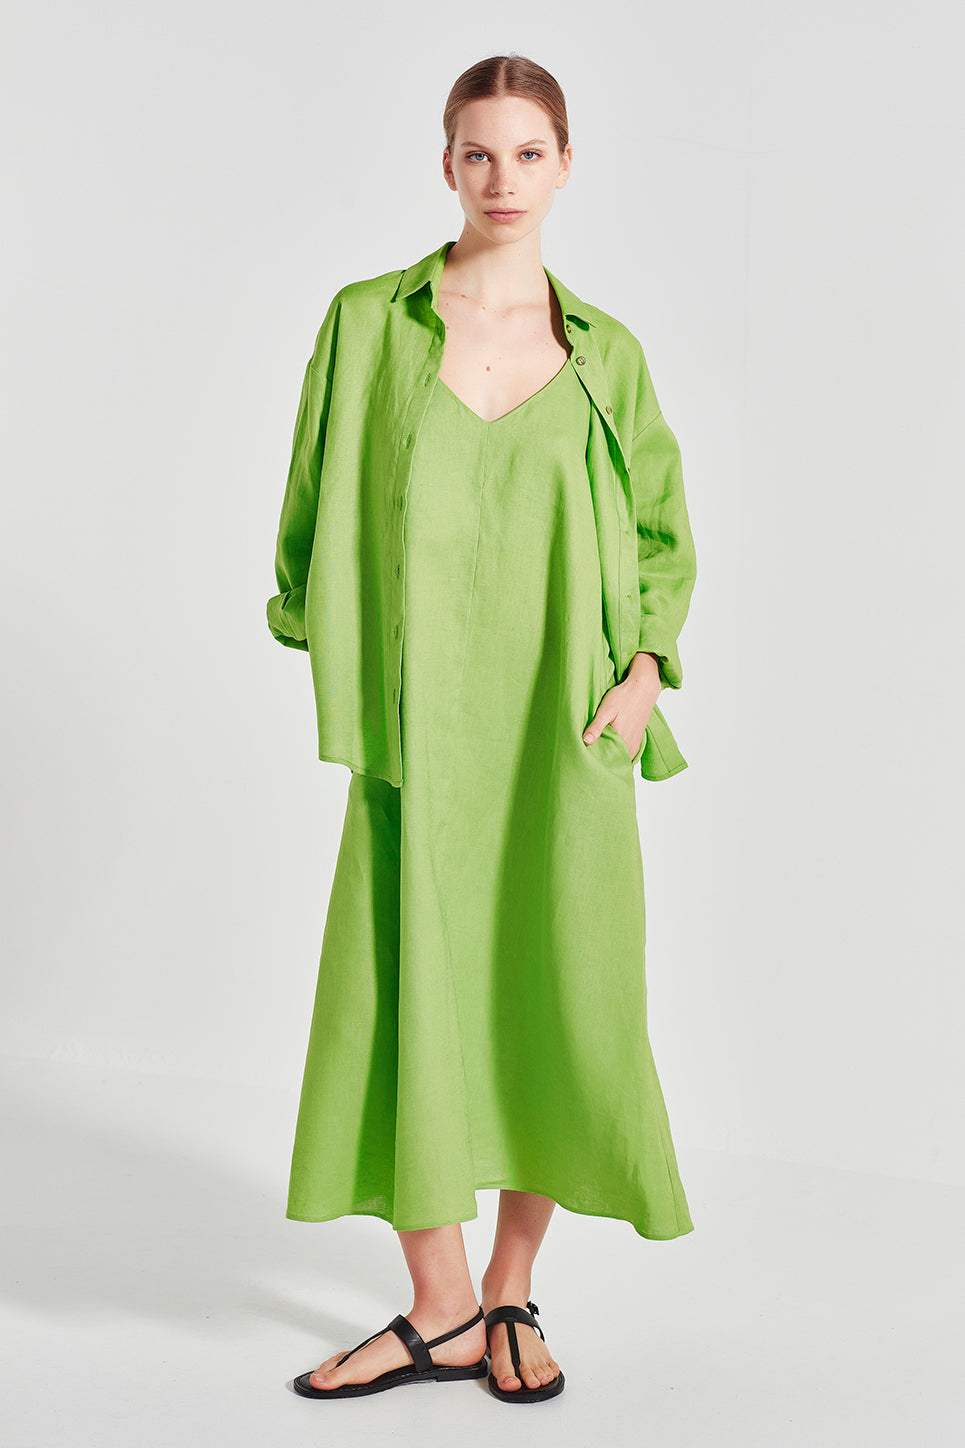 The Marnie 2-Way Sun Dress in Lime